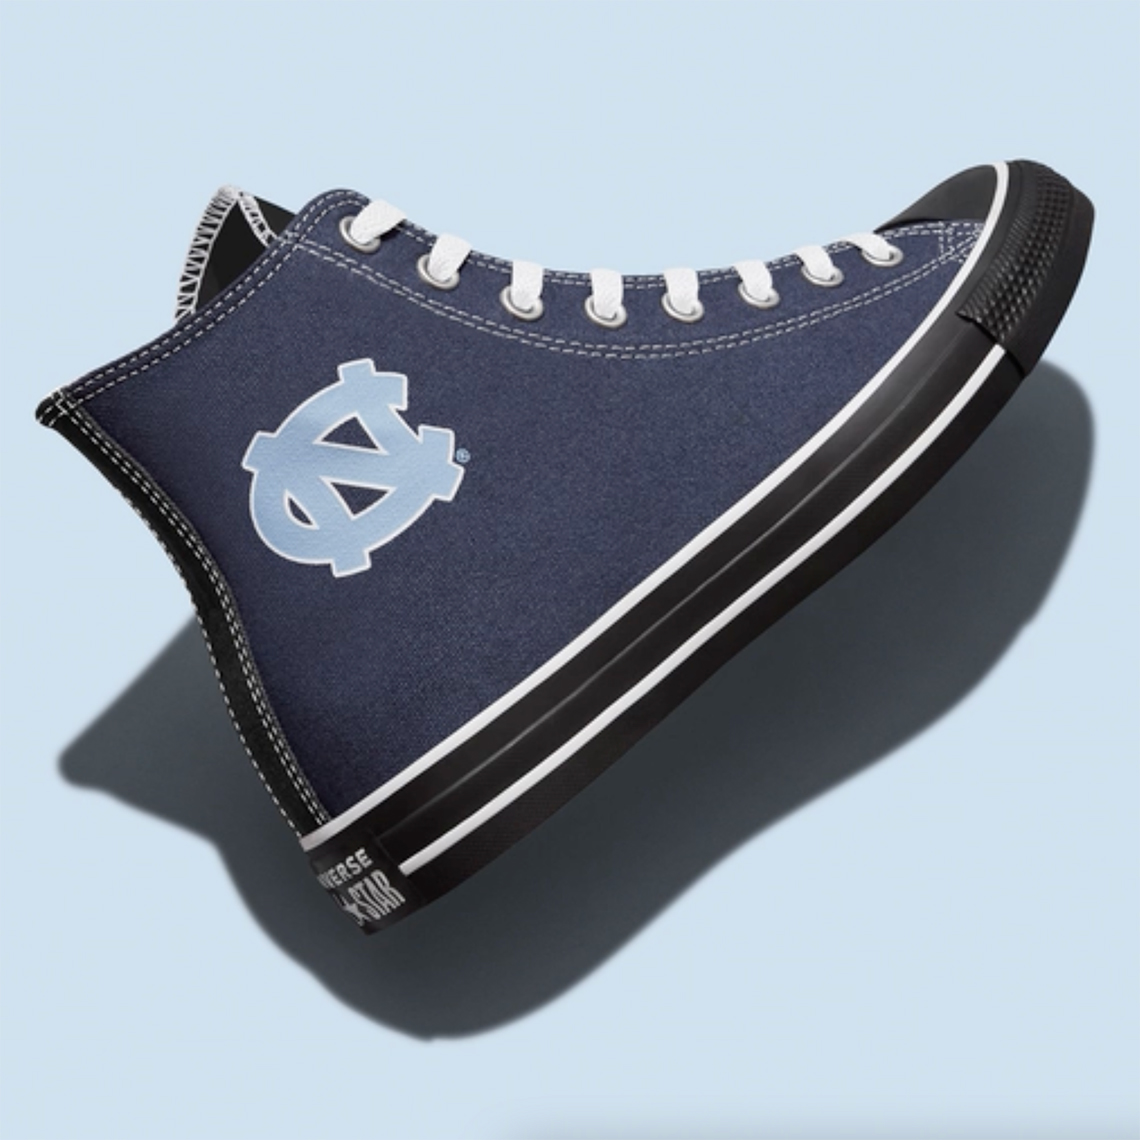 converse chuck taylor custom college collection march madness 6